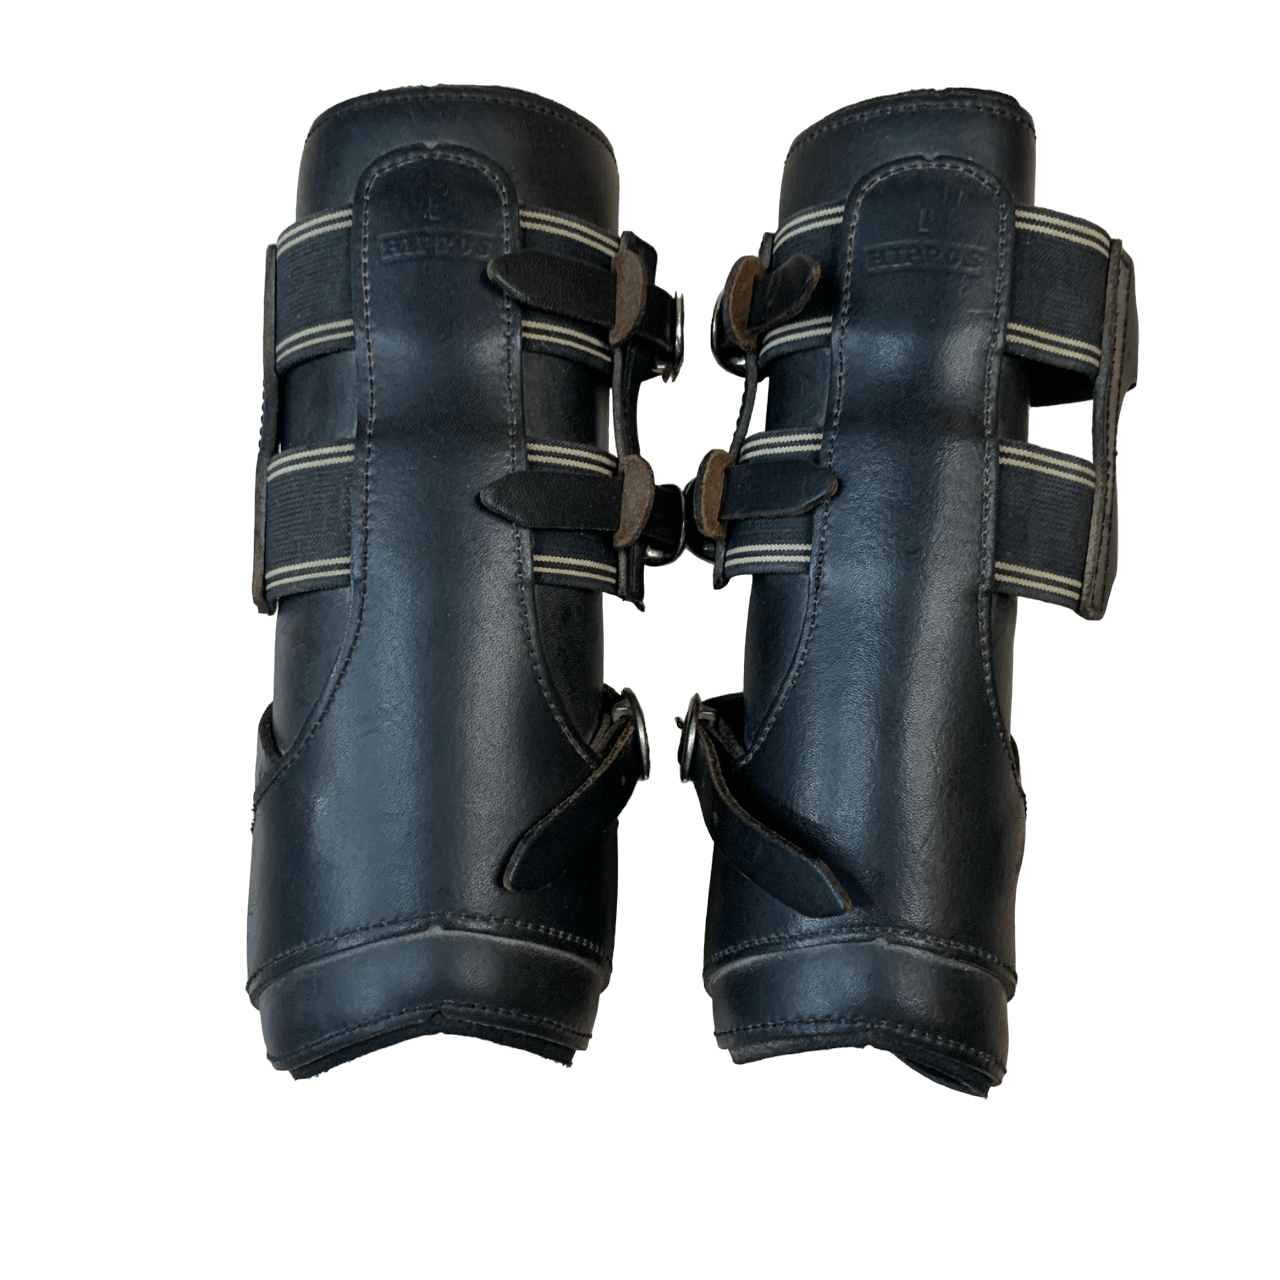 Back view of leather splint boots